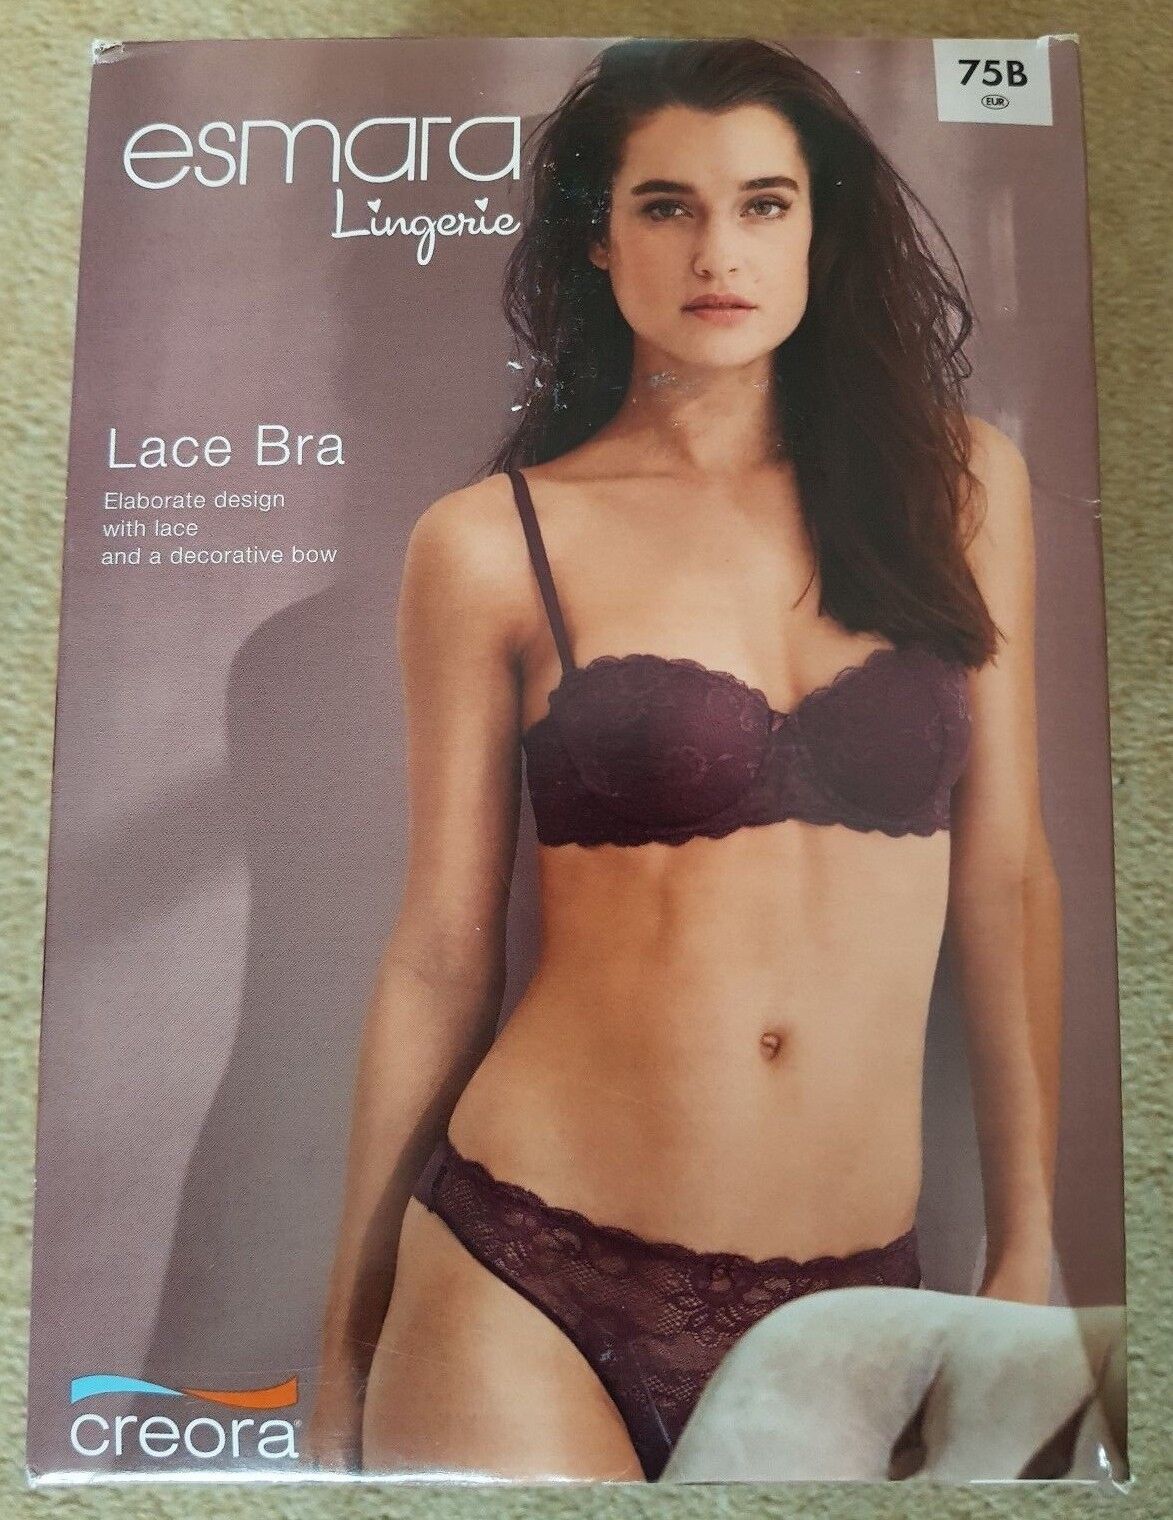 Esmara Lingerie Lace Bra with decorative bow Size 75B (EUR) Brand New  padded cup